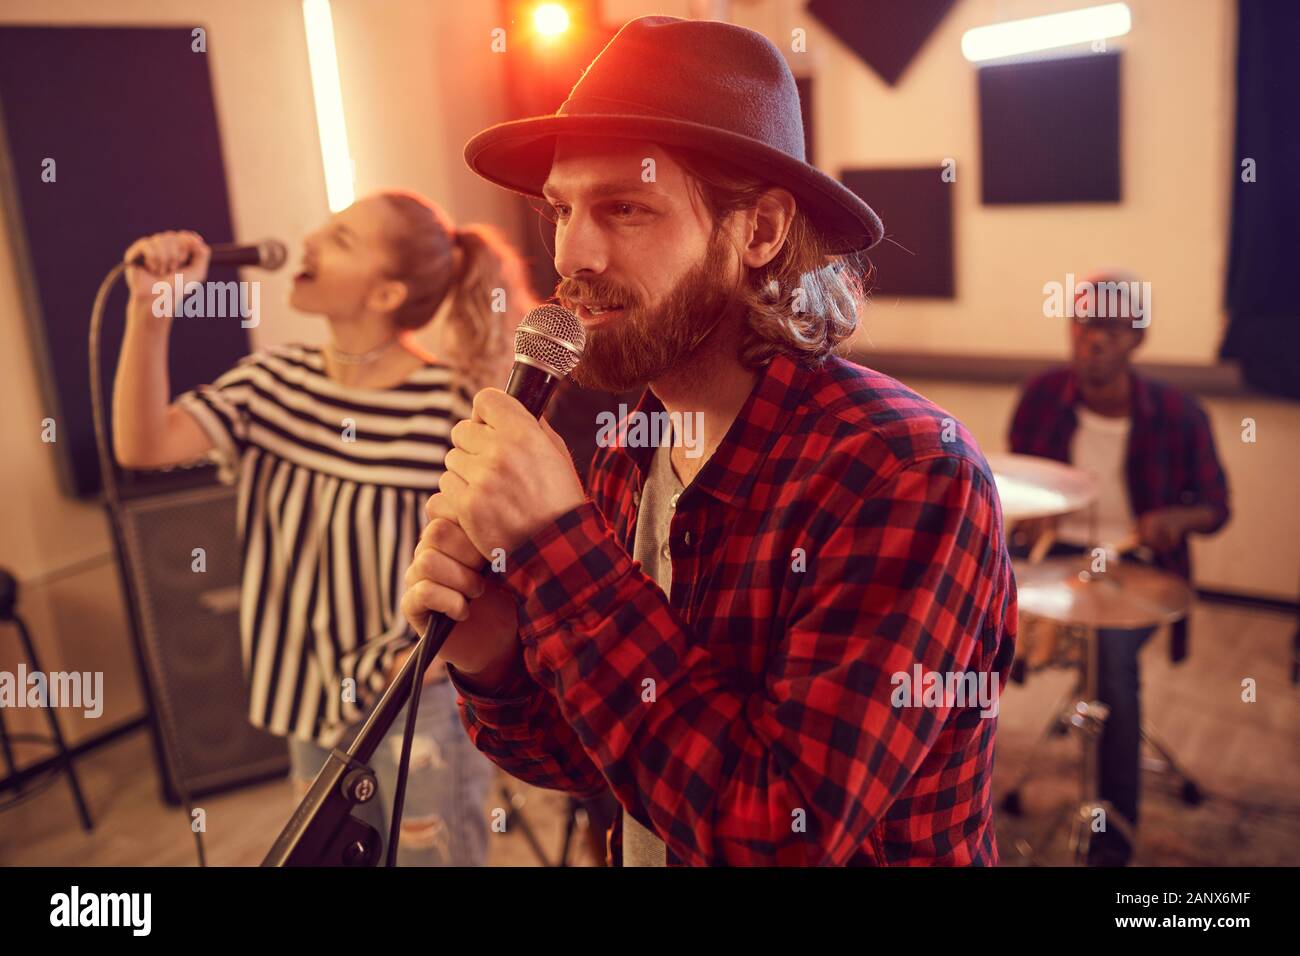 Side view portrait of handsome bearded man singing to microphone during rehearsal or concert with music band, copy space Stock Photo